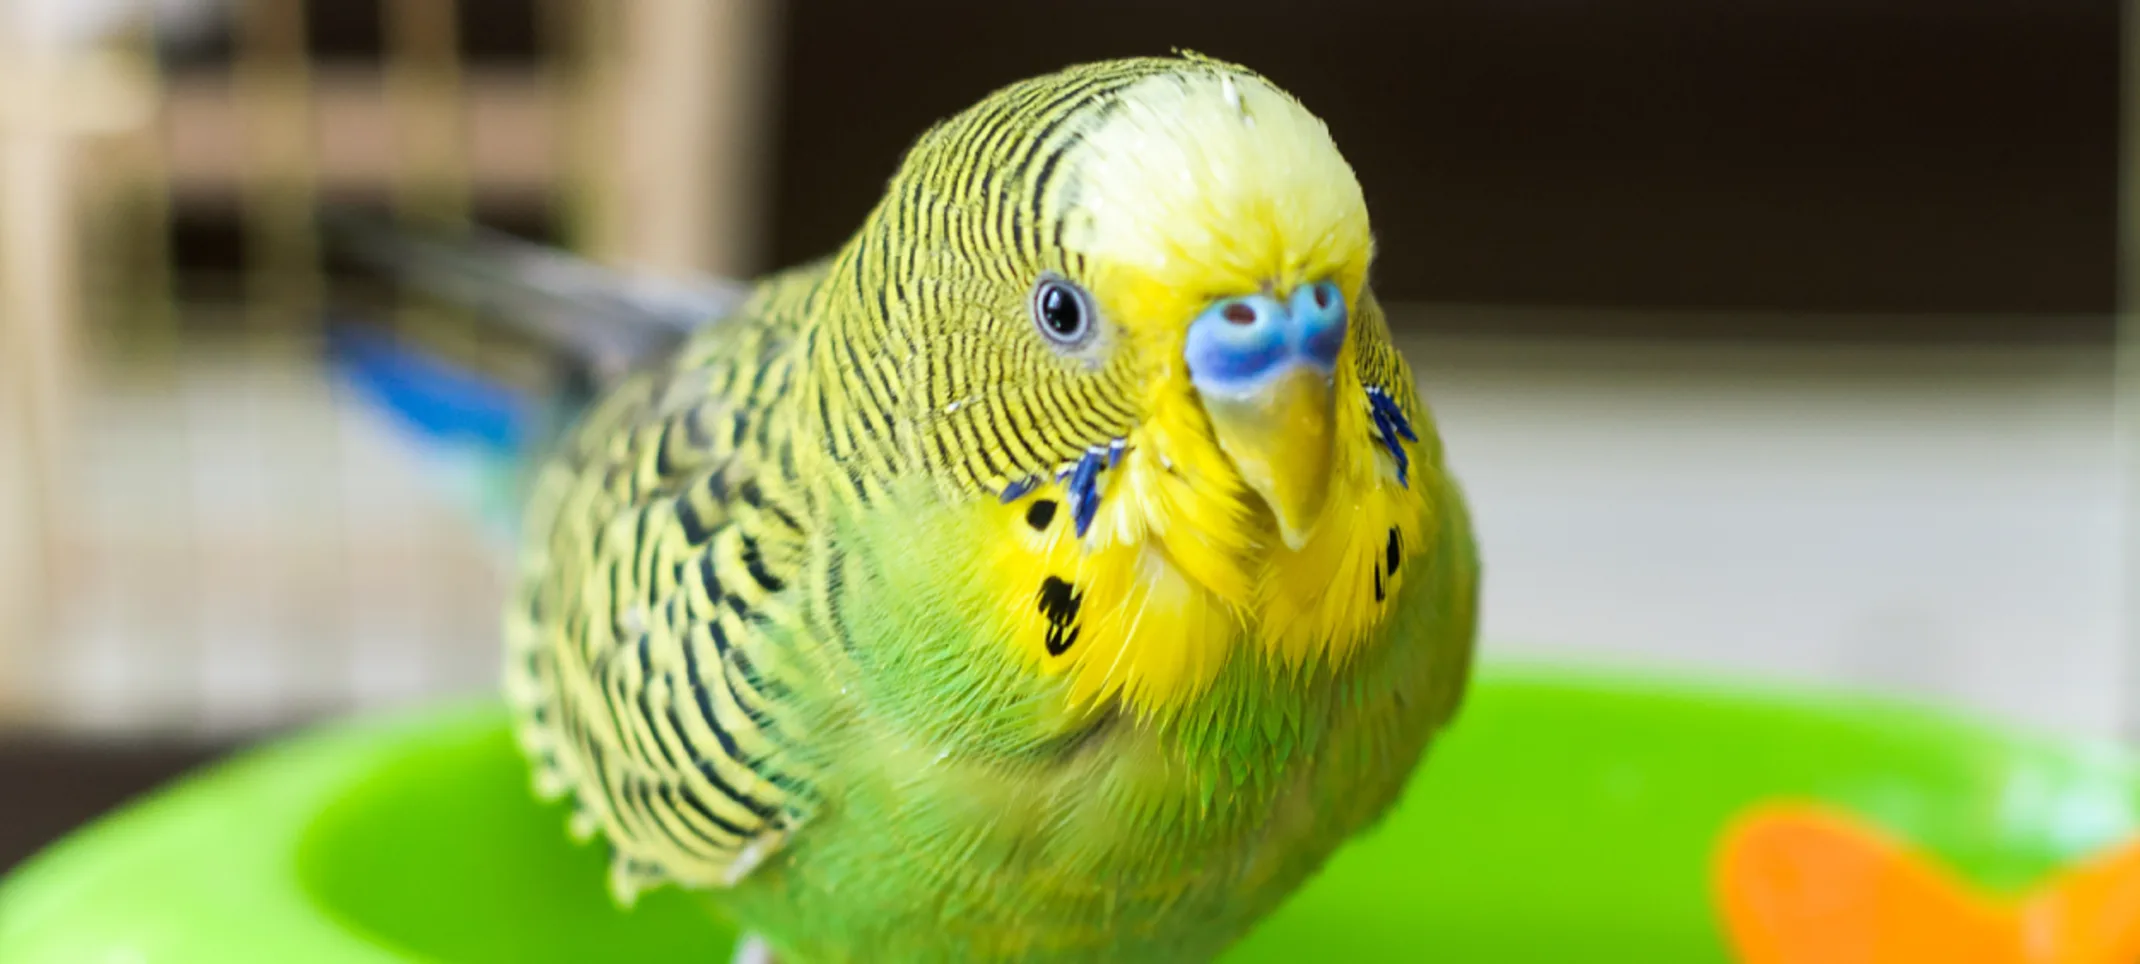 A bright green and yellow bird perched up on the edge of its water bowl inside its cage. 